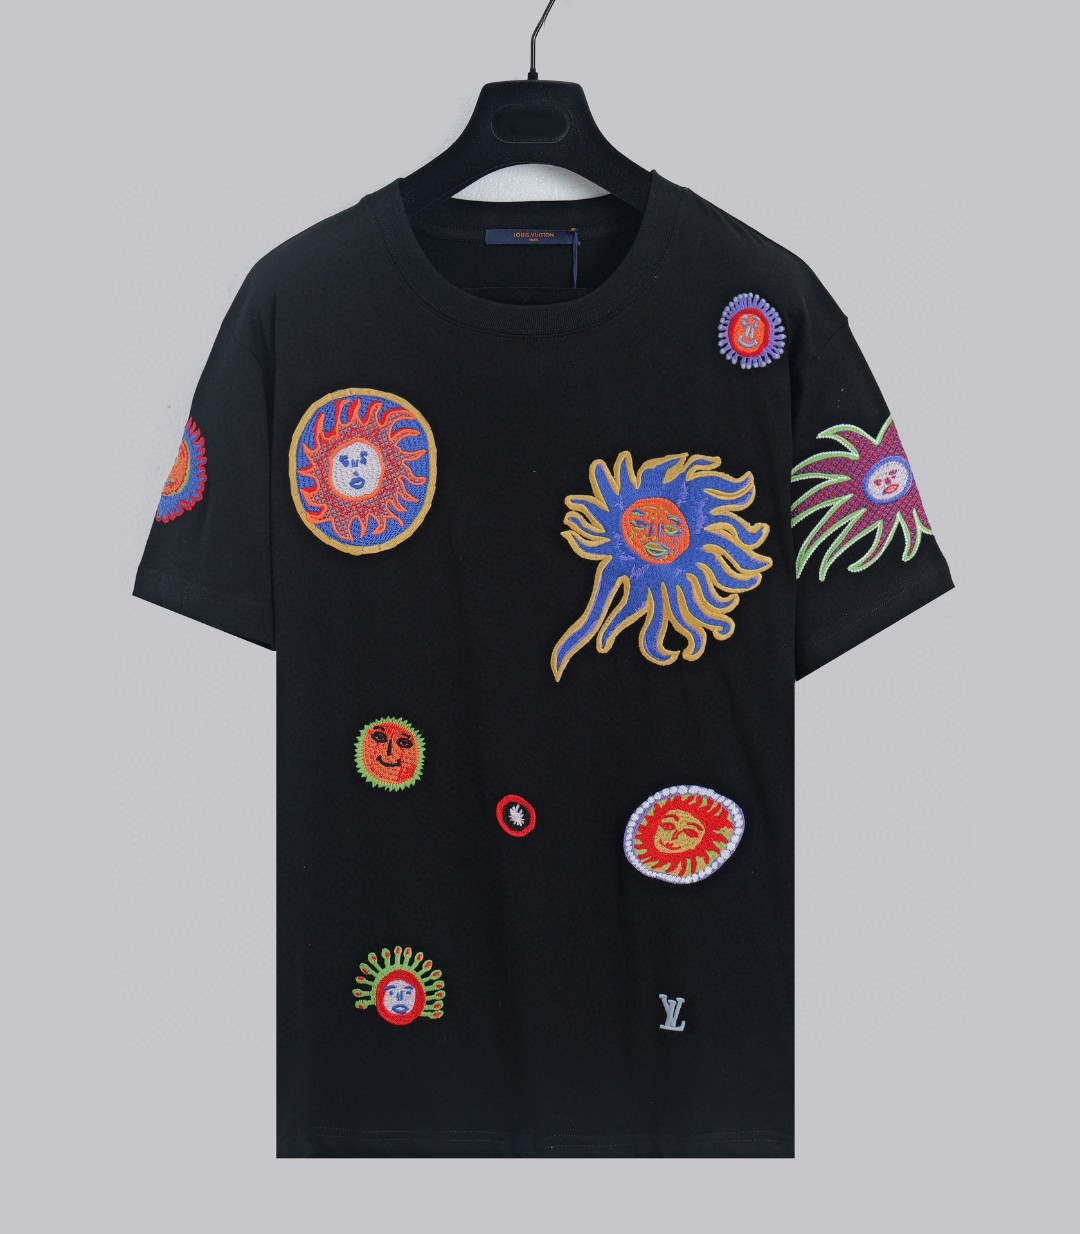 Louis Vuitton Clothing T-Shirt Black Embroidery Cotton Summer Collection